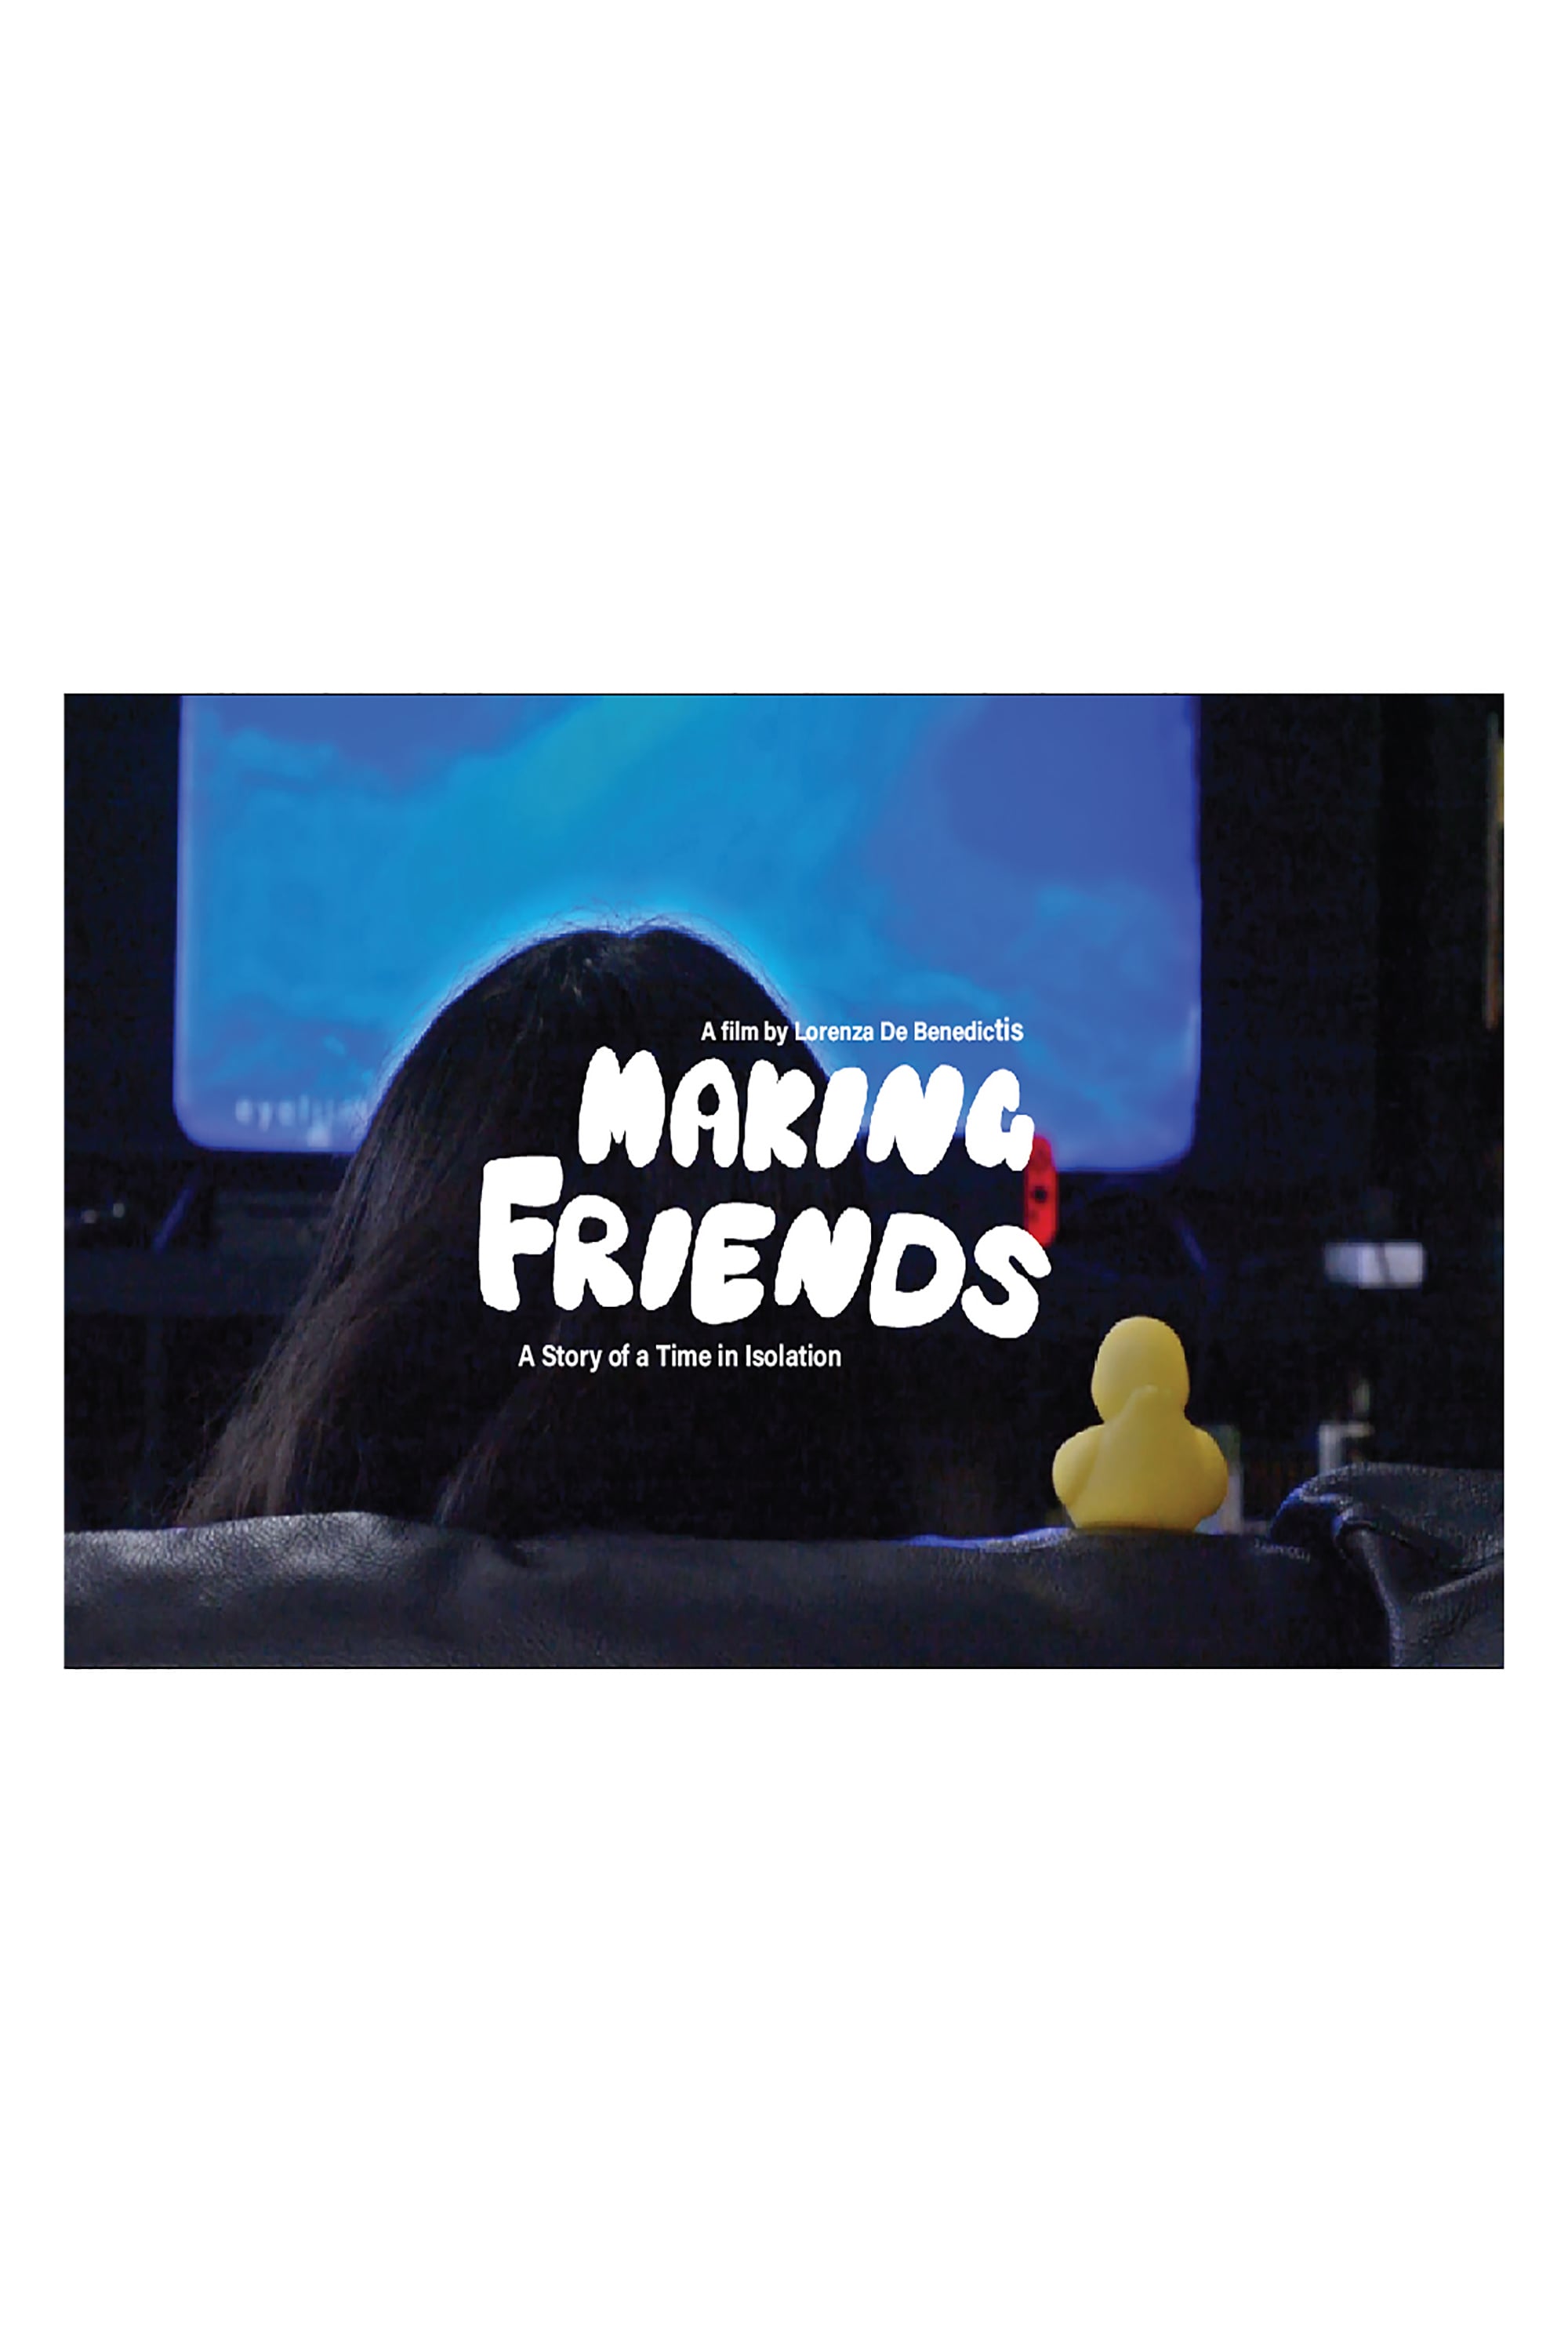 Making Friends: A Story of A Time in Isolation